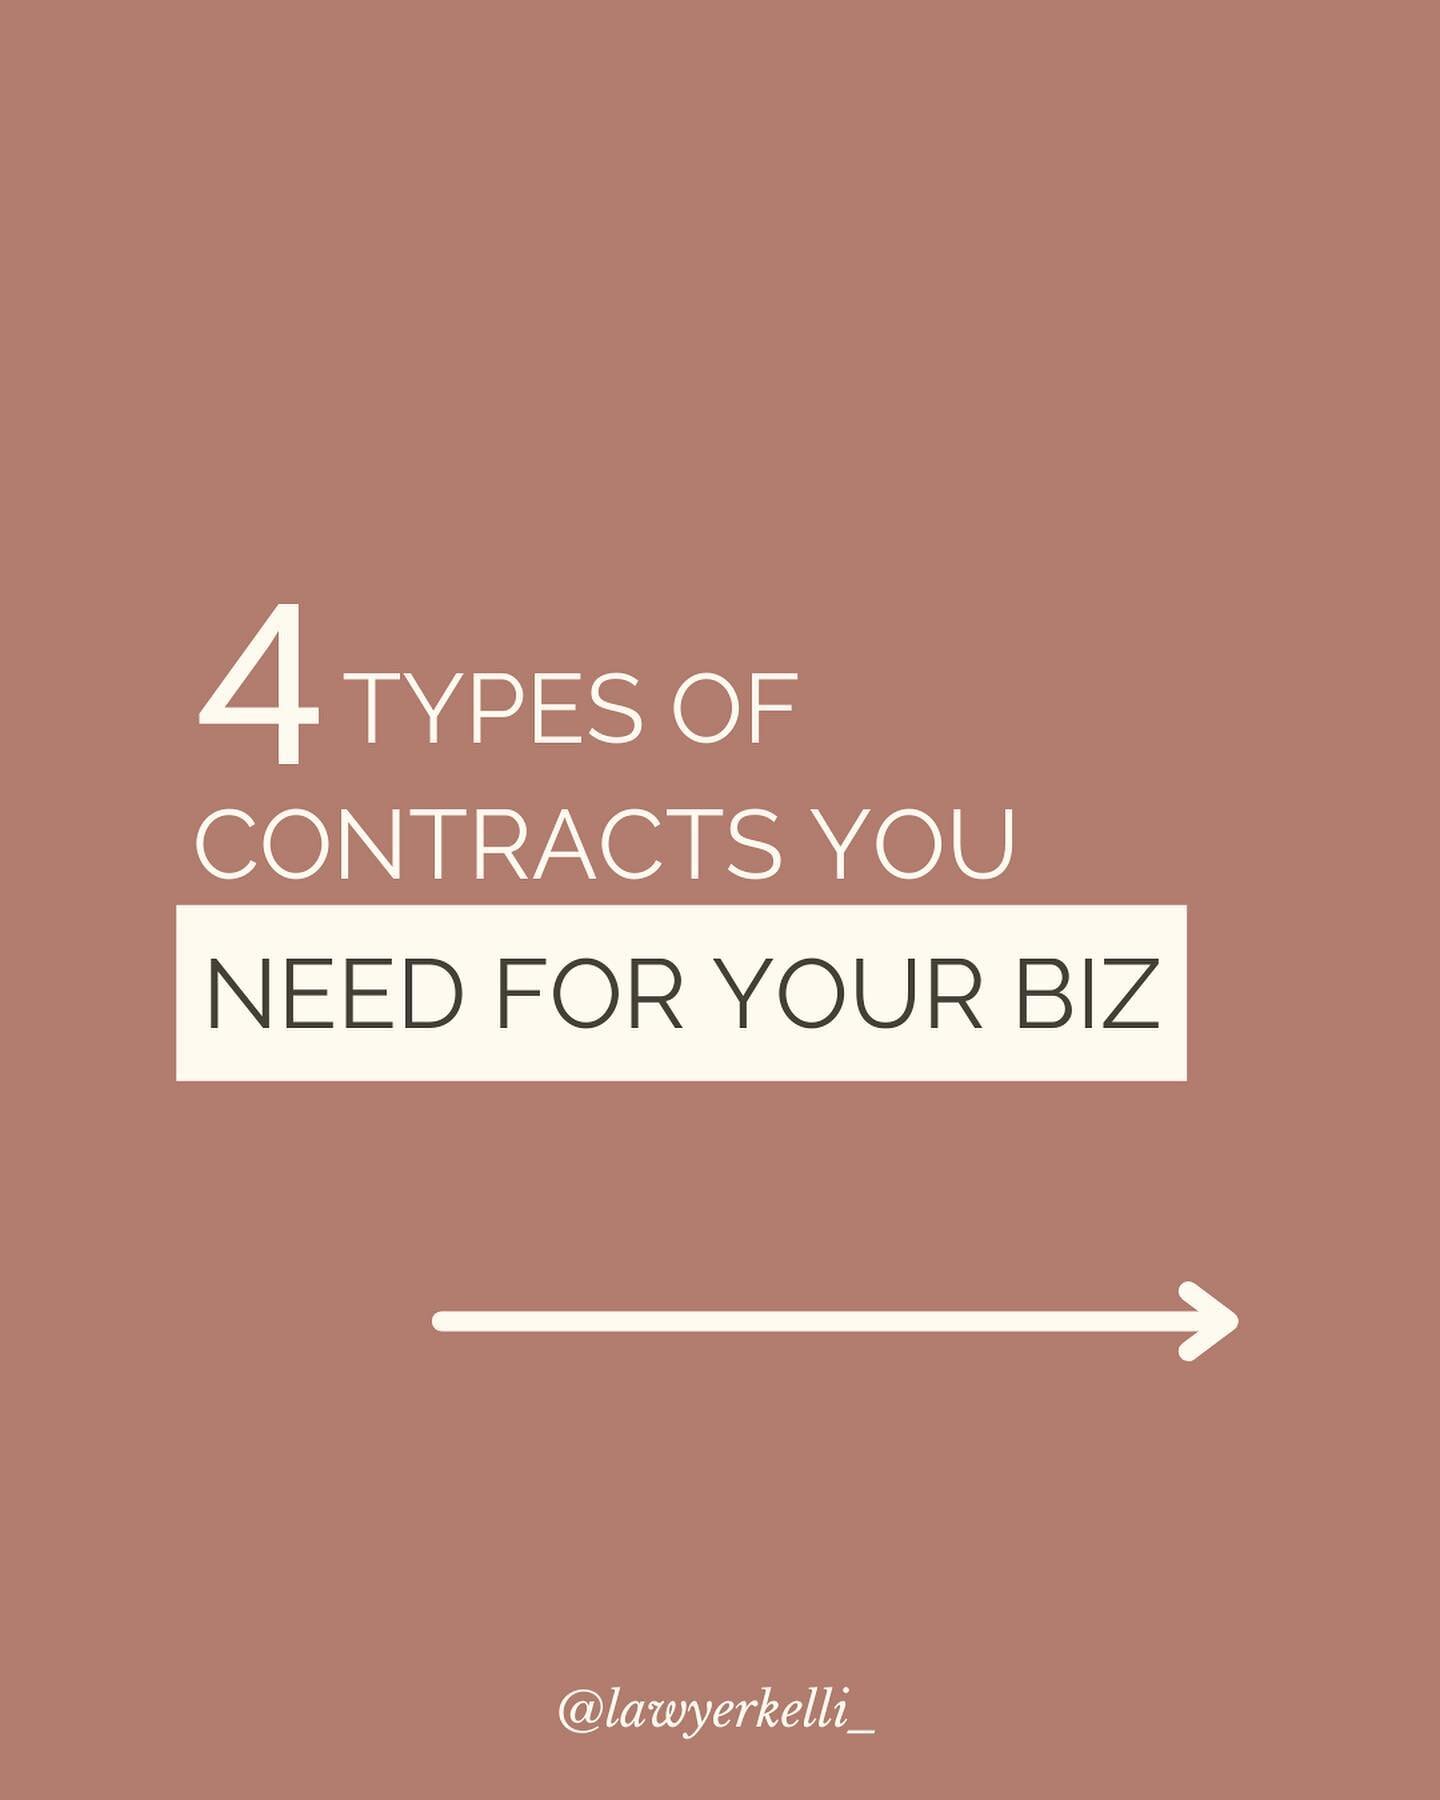 The 4 types of contracts you need for your biz! 📣

You won&rsquo;t need all of these right away, but if you plan to grow &amp; scale a biz, you&rsquo;ll likely need all 4 at some point!

(That&rsquo;s why my bundles are the best deal to save 💰)

Th